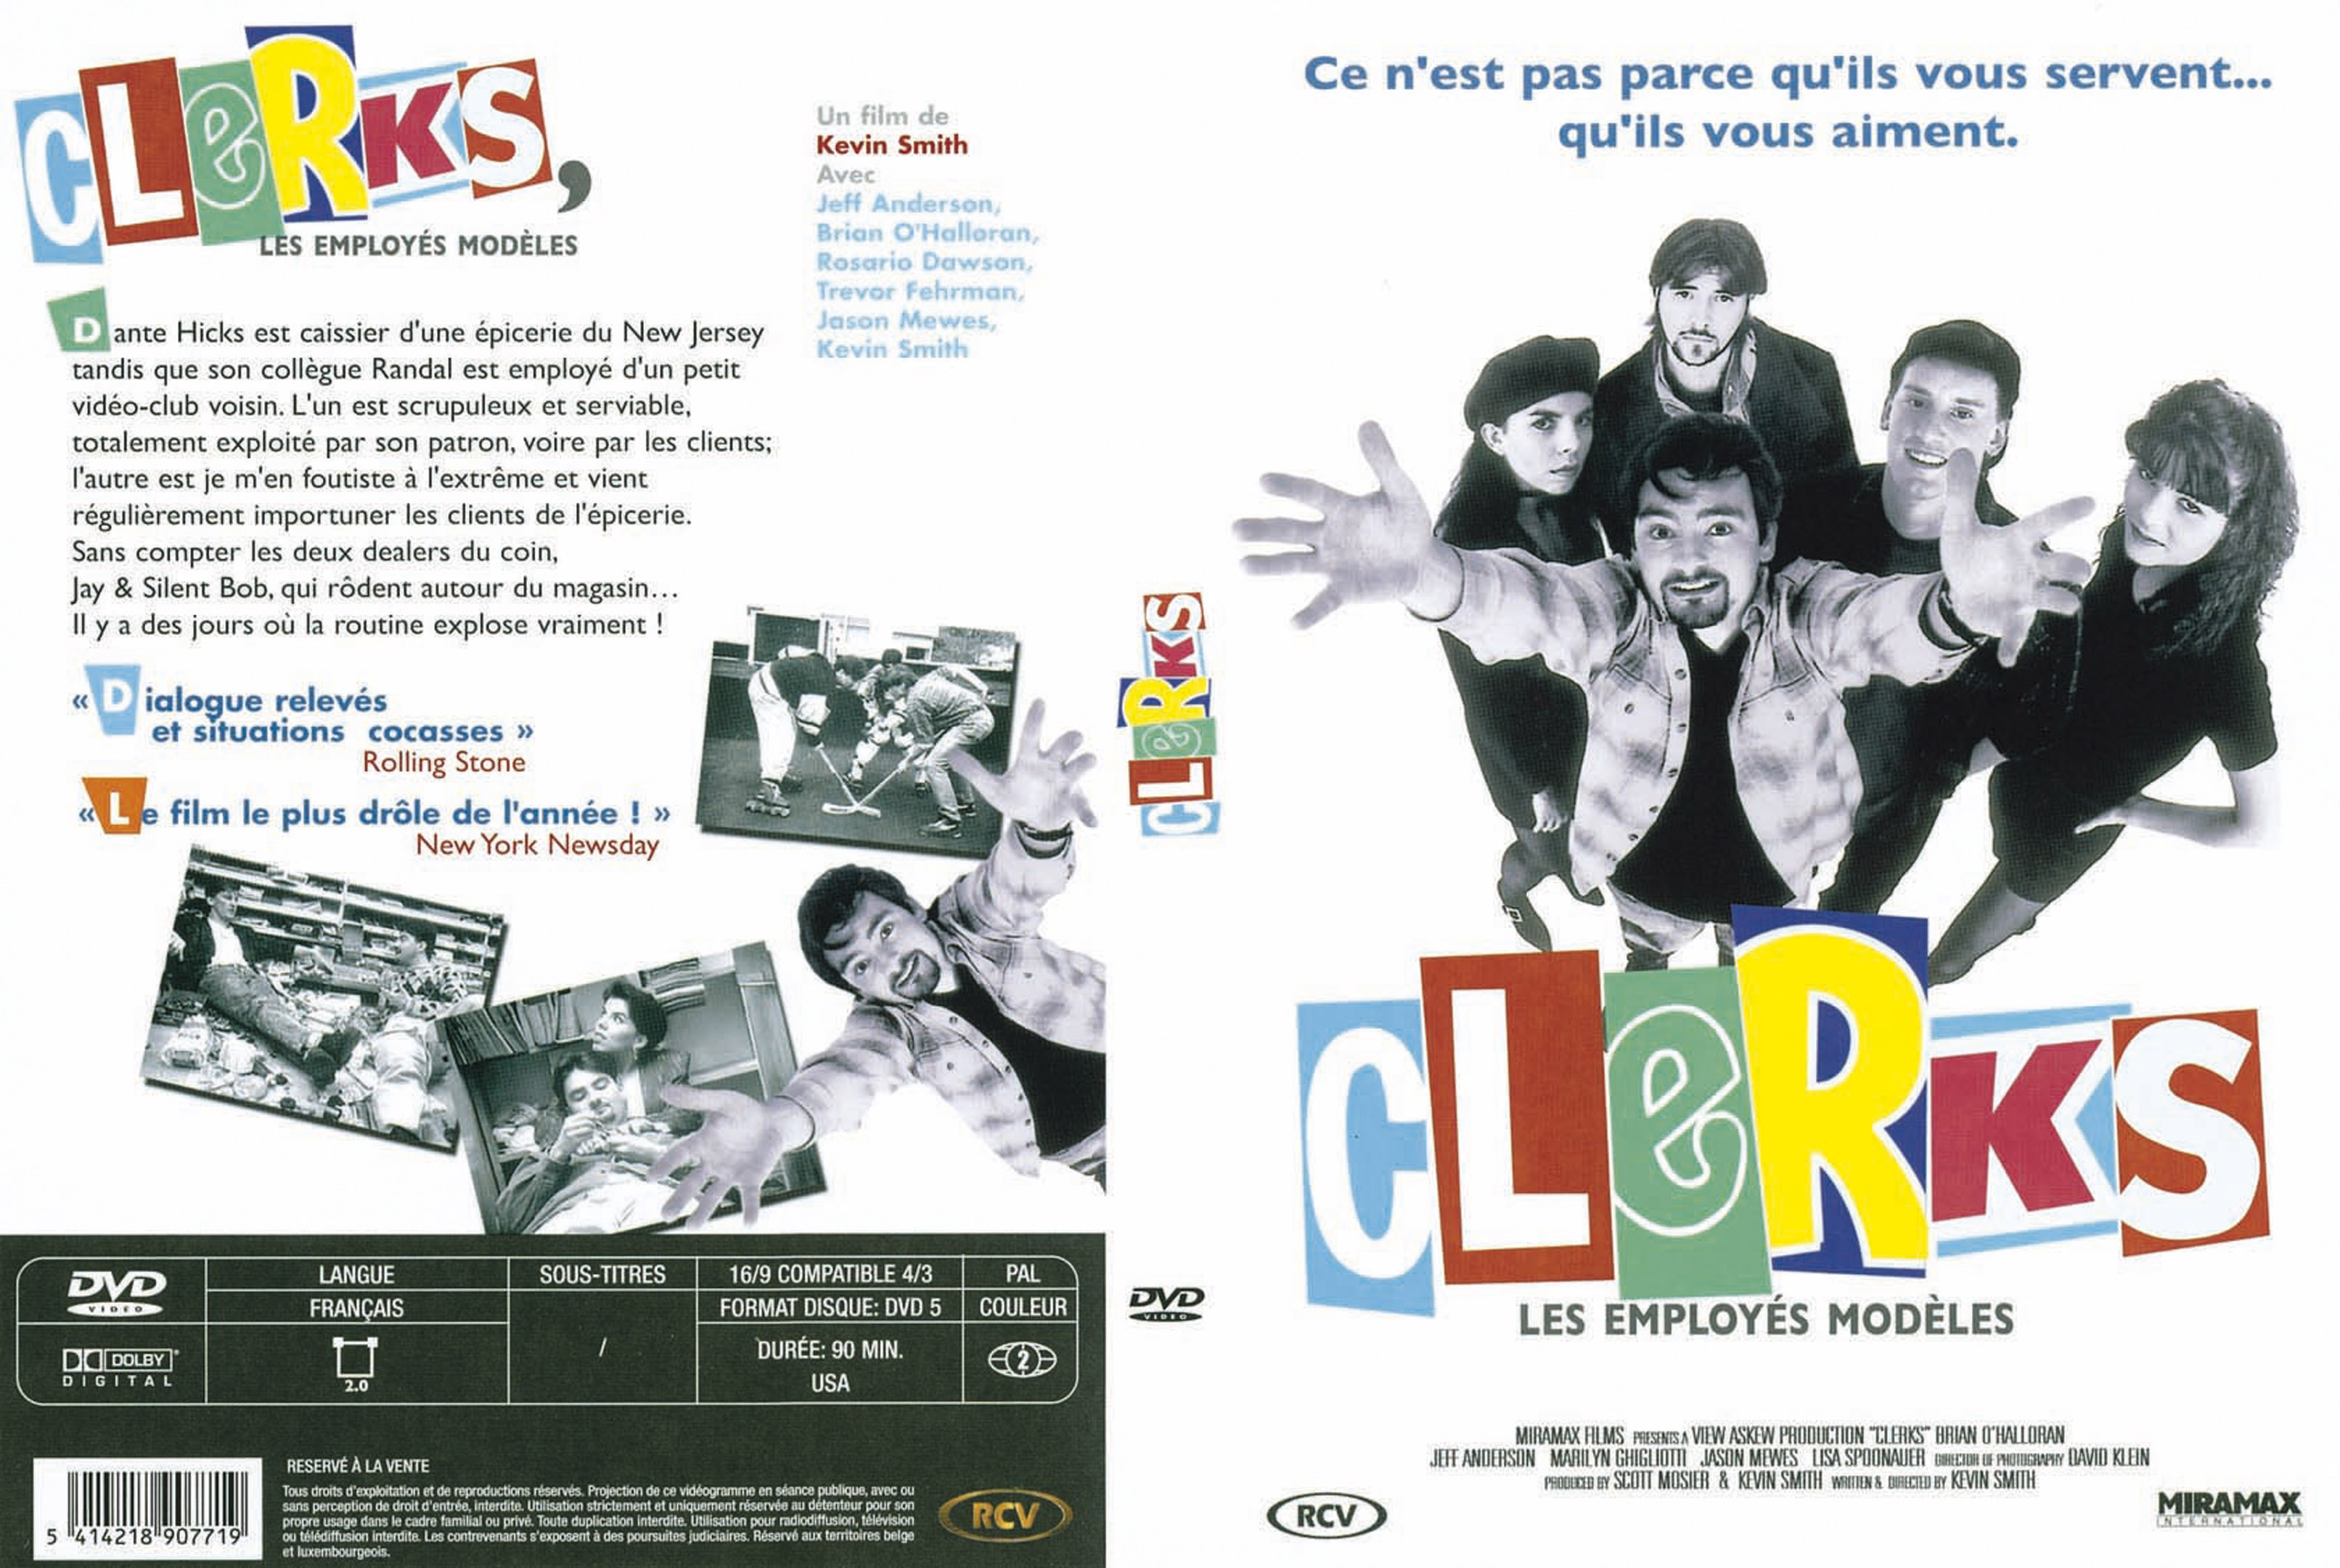 Jaquette DVD Clerks